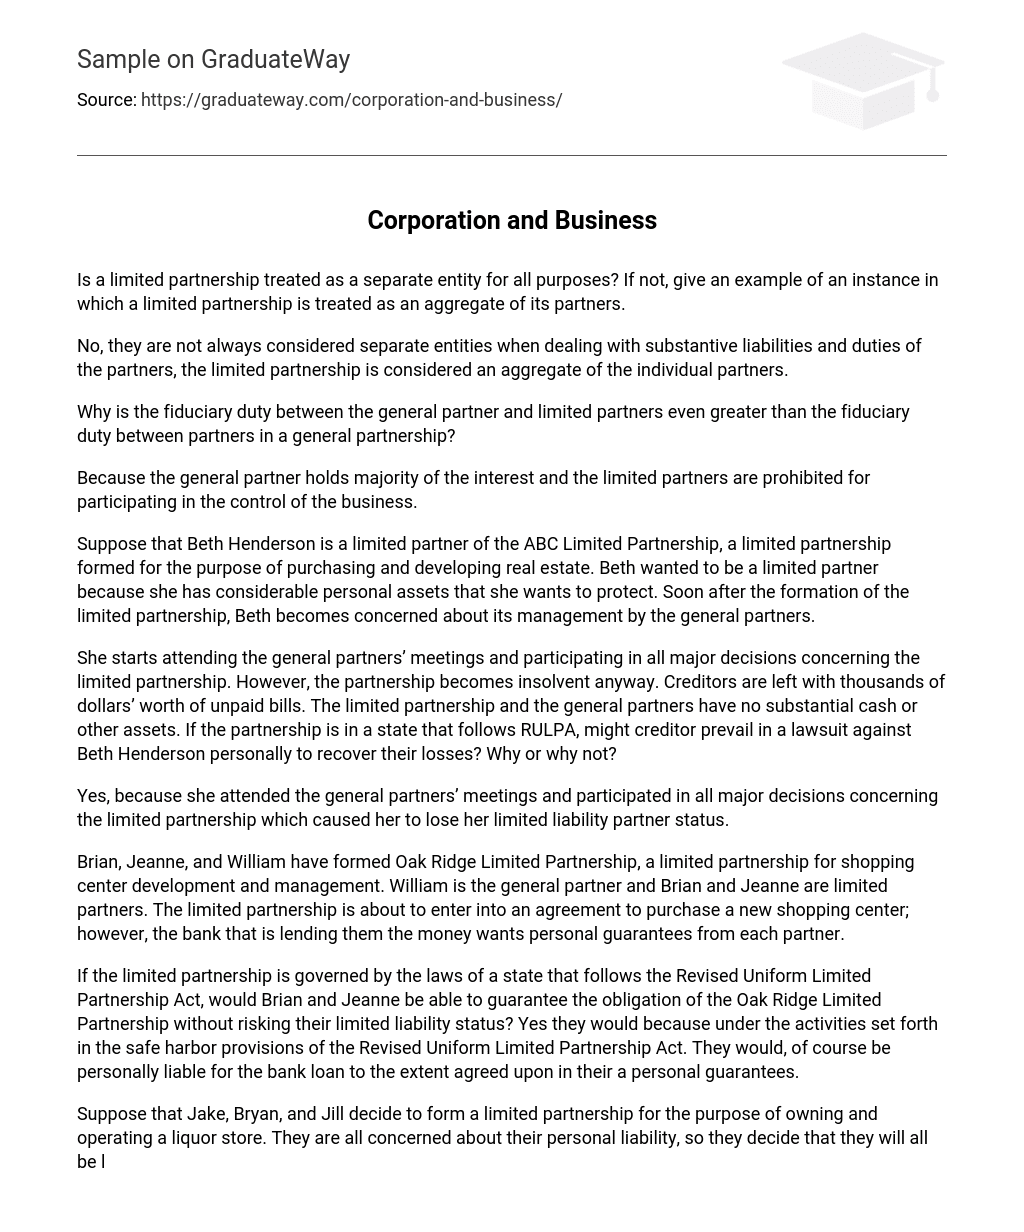 Corporation and Business